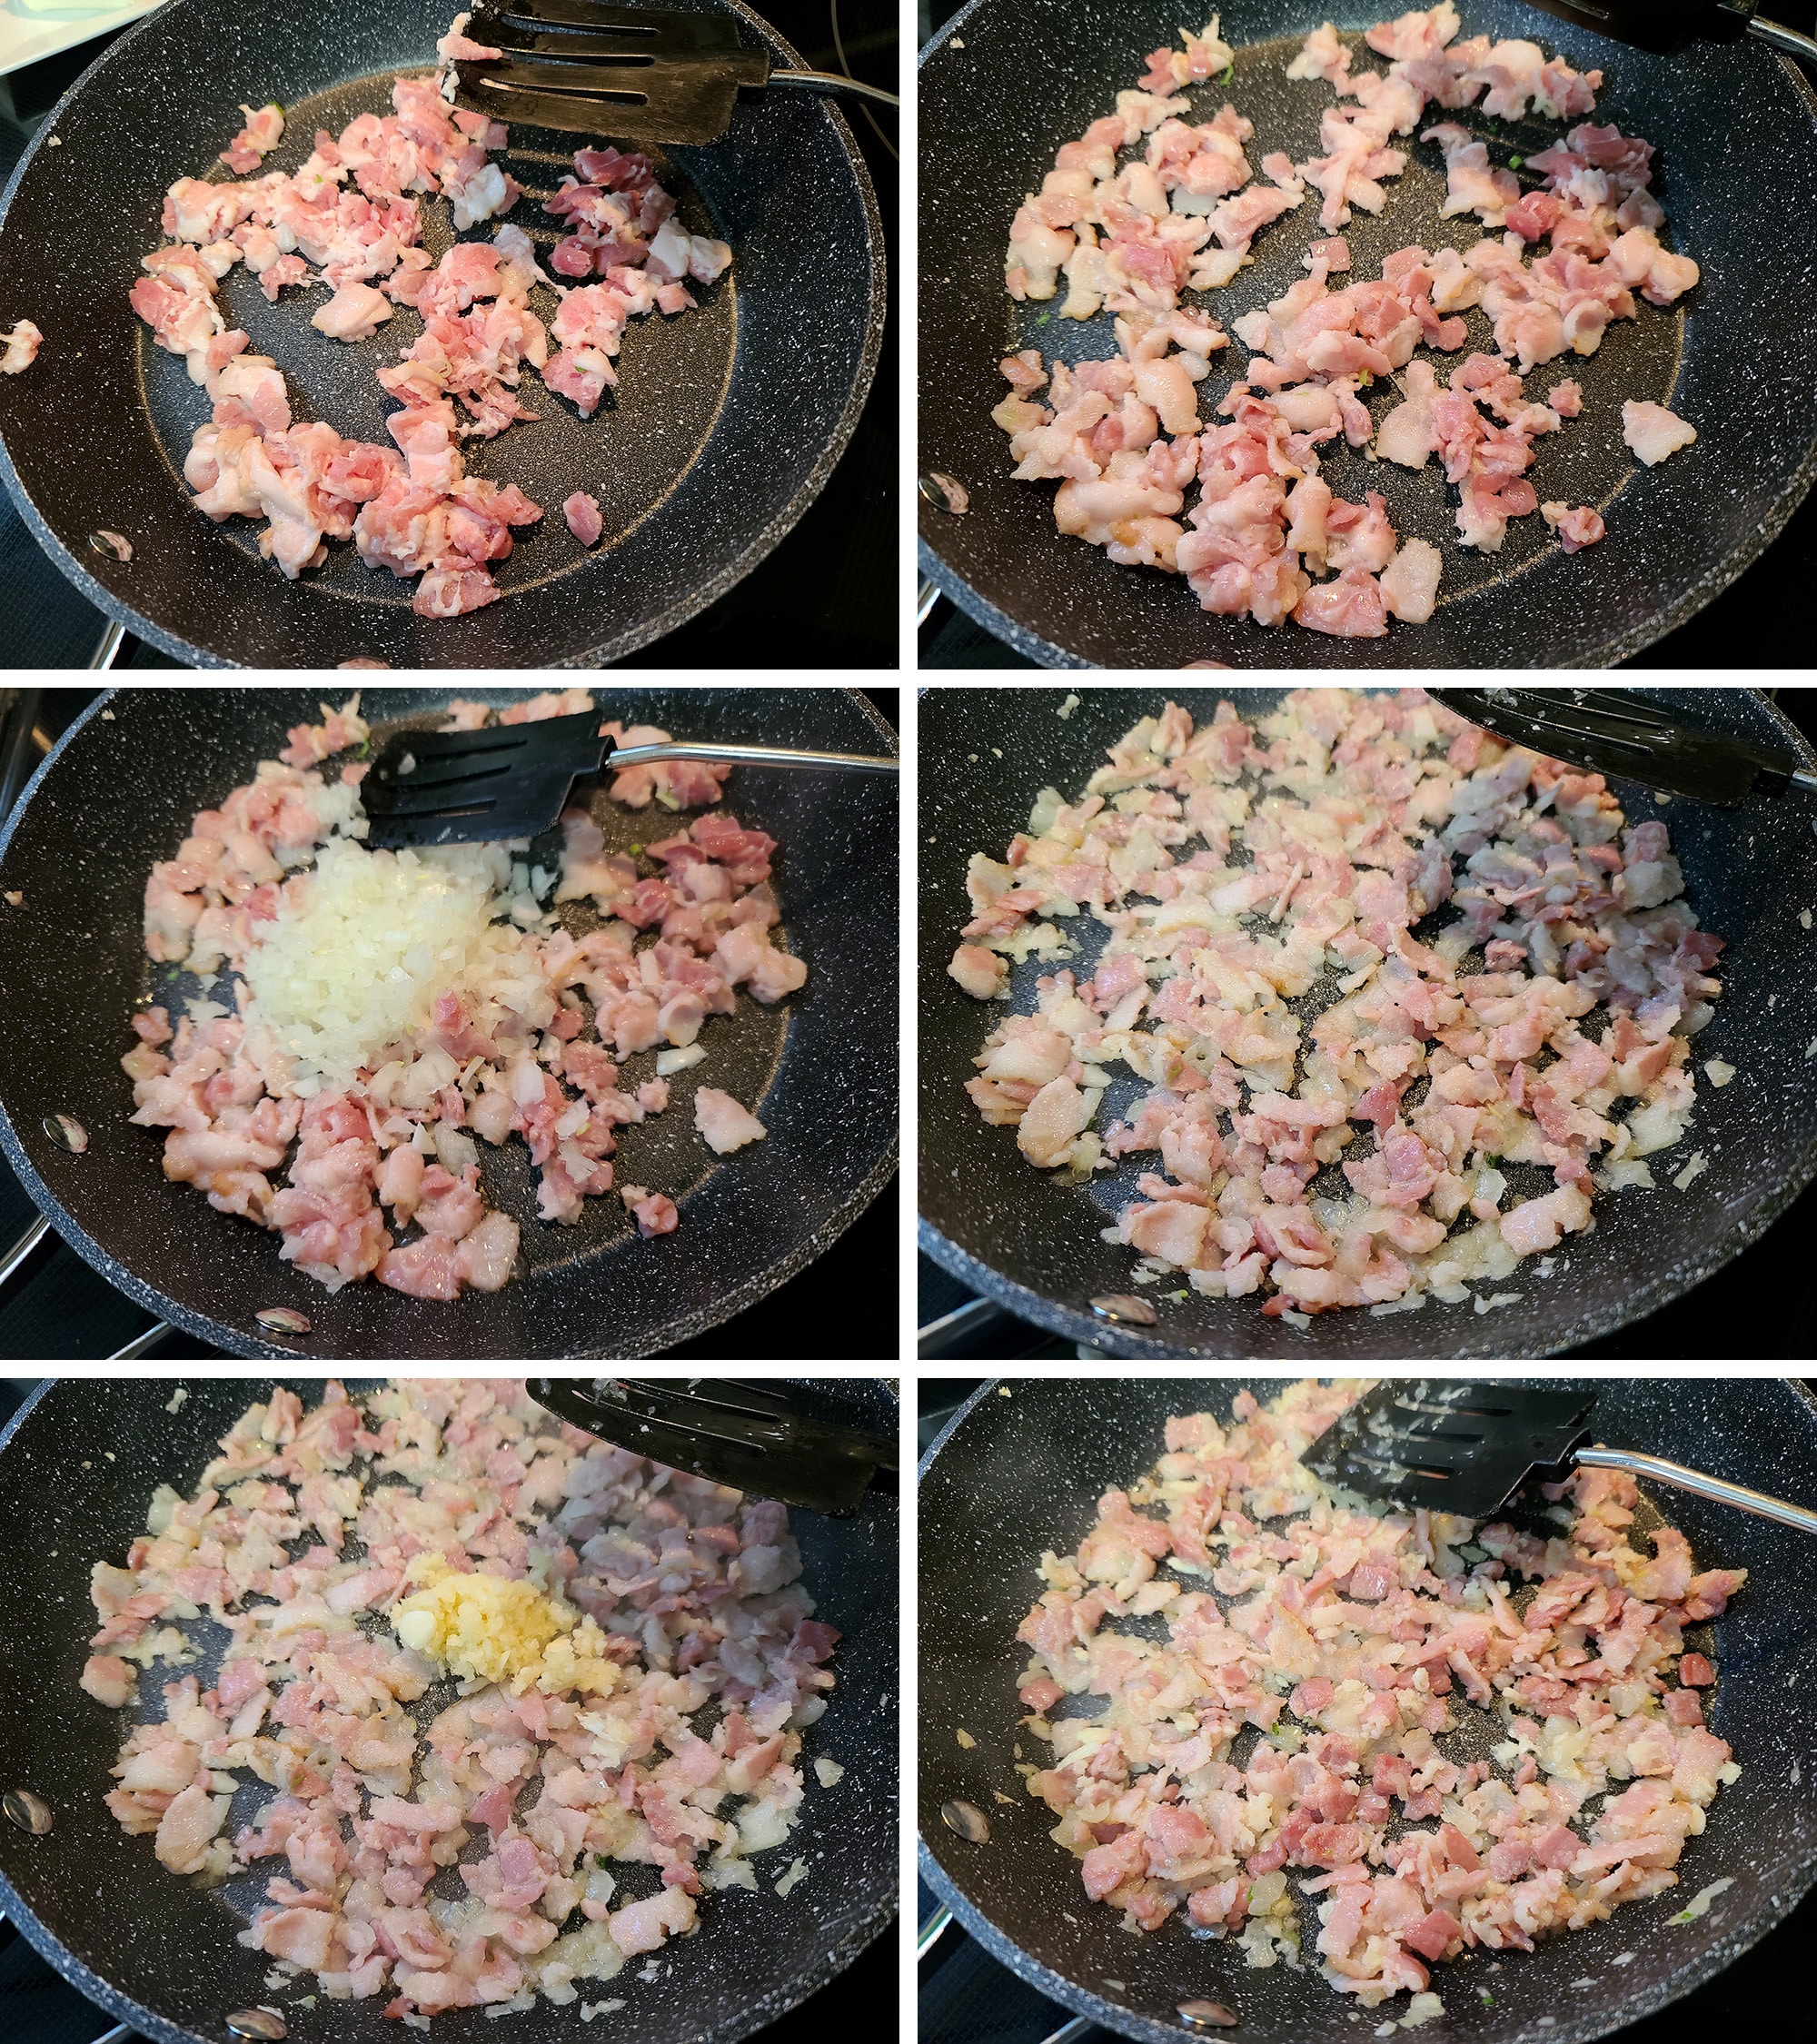 6 part image showing bacon, onions, and garlic being cooked in a nonstick fry pan.